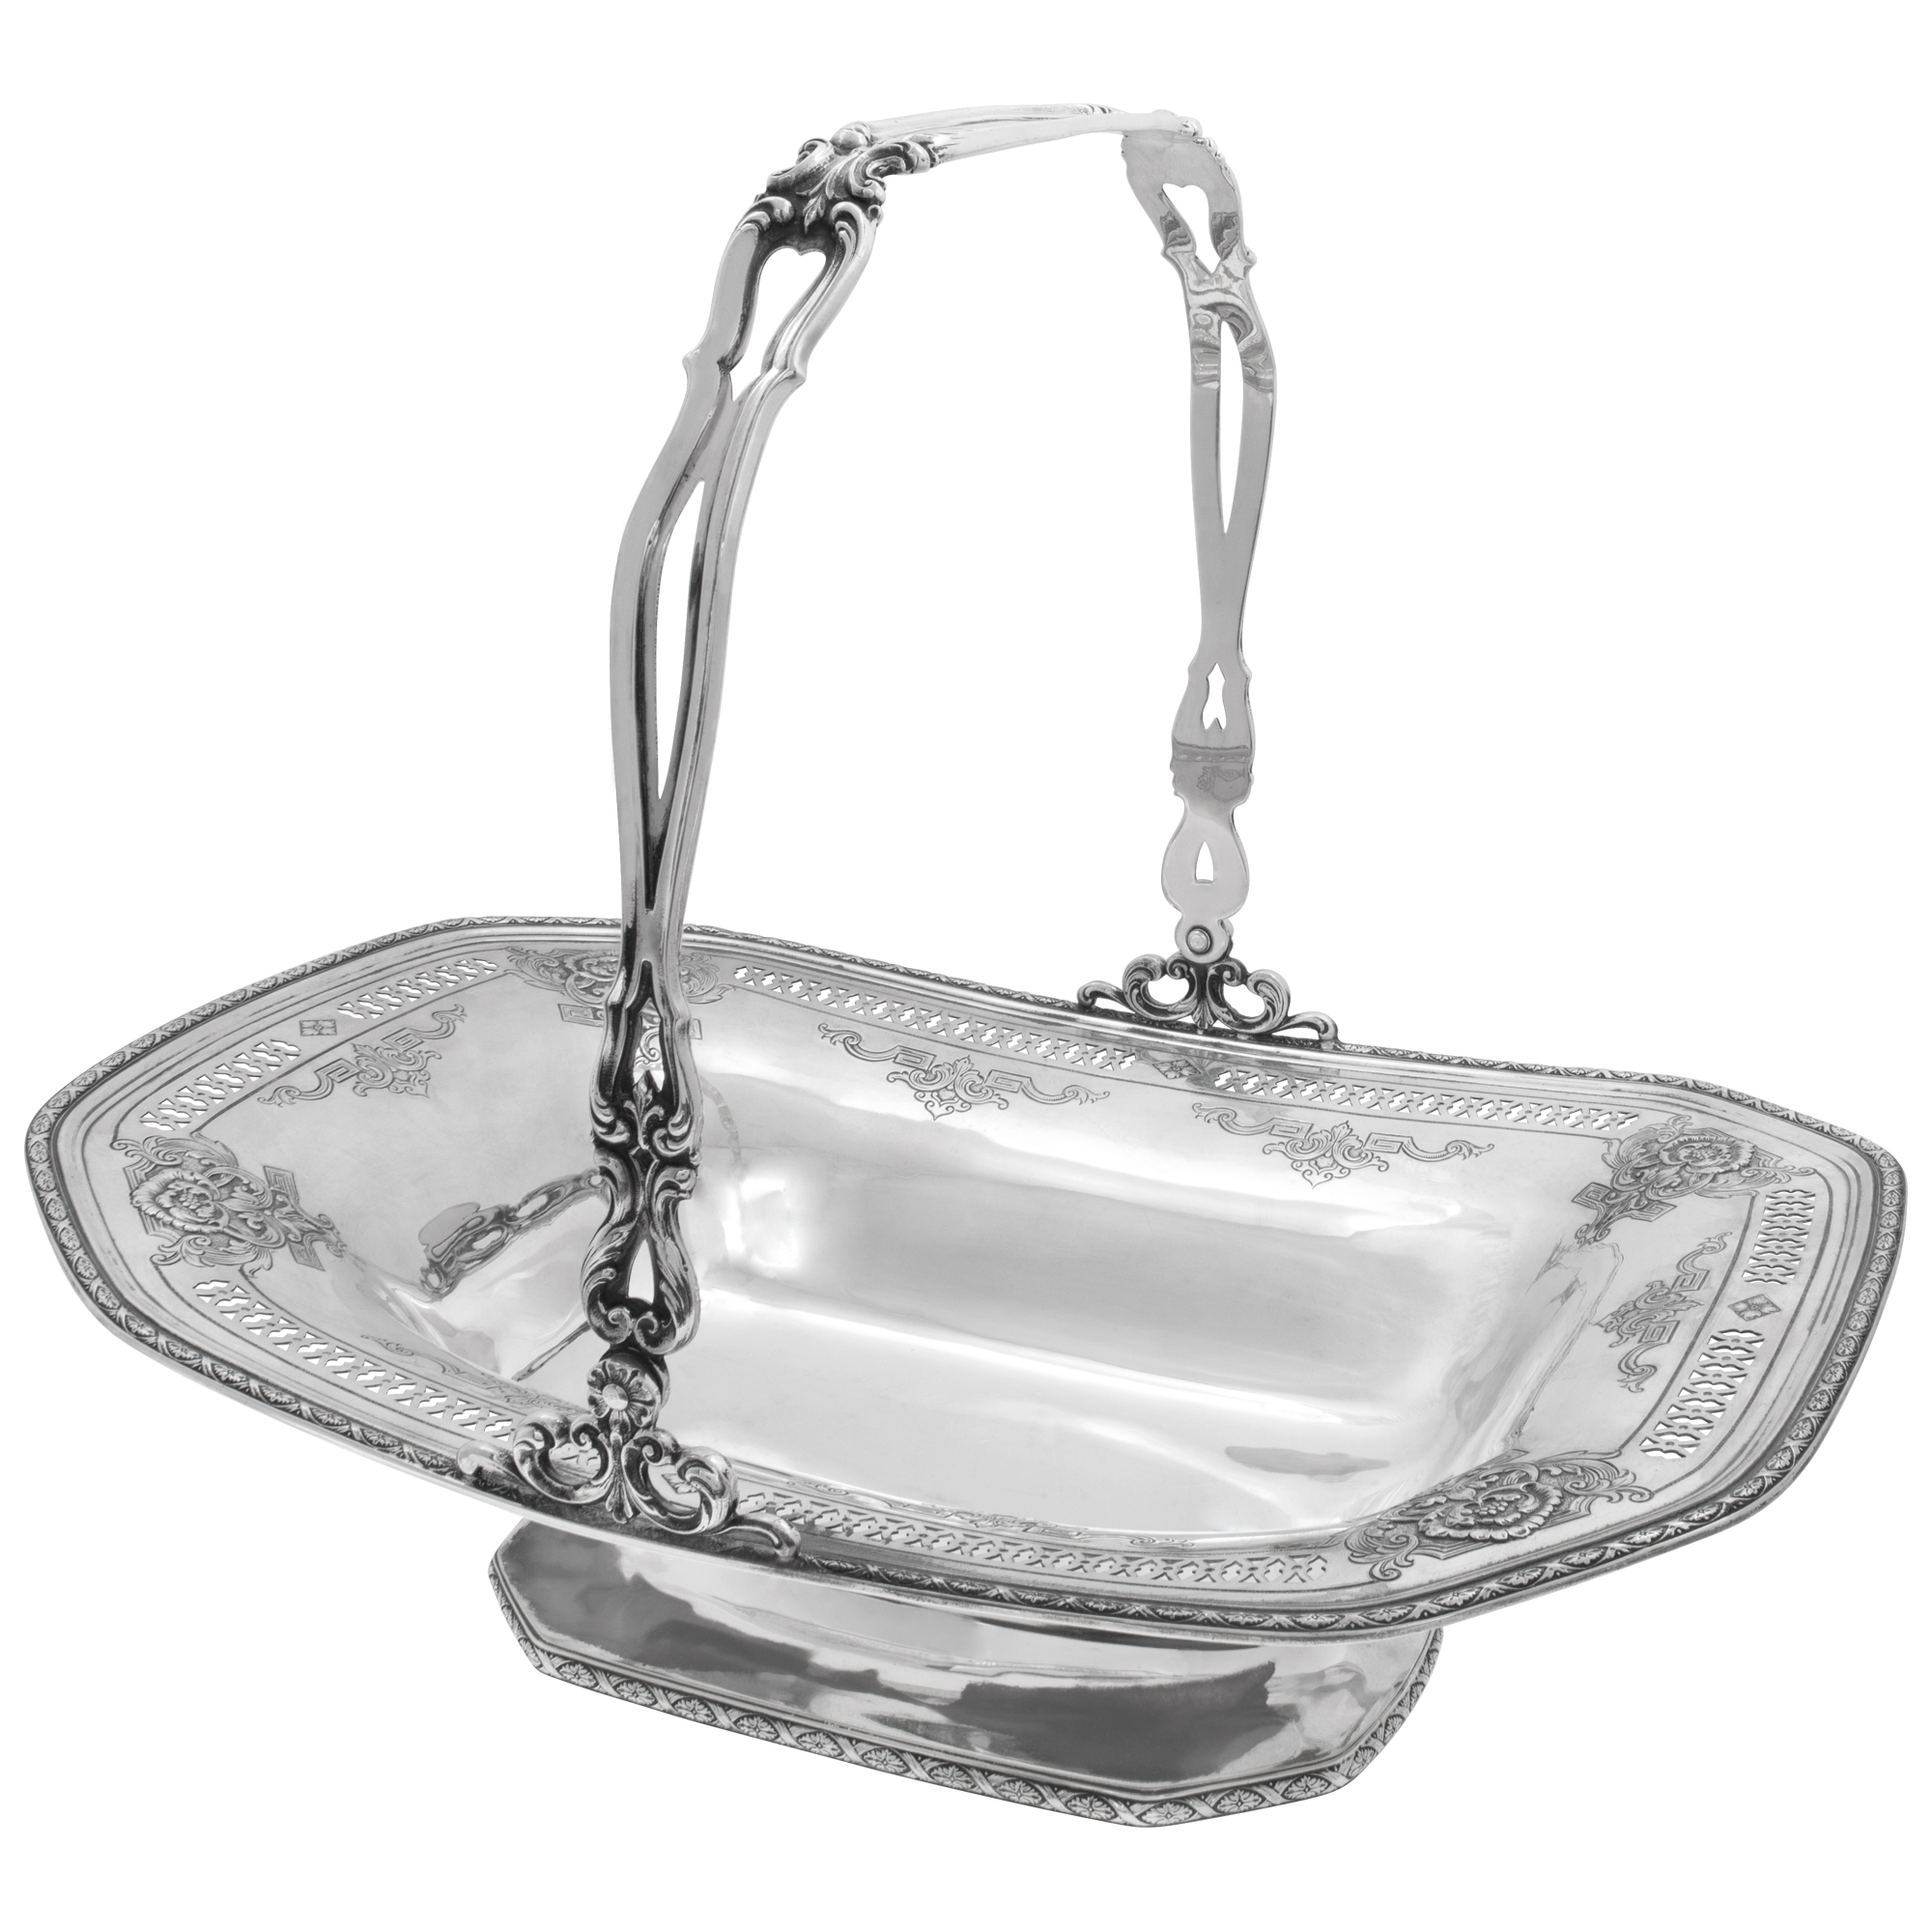 Antique D'ORLEANS or LOUIS XIV pattern, footed sterling silver center piece basket with handle by Towle Silversmiths. Circa 1923.